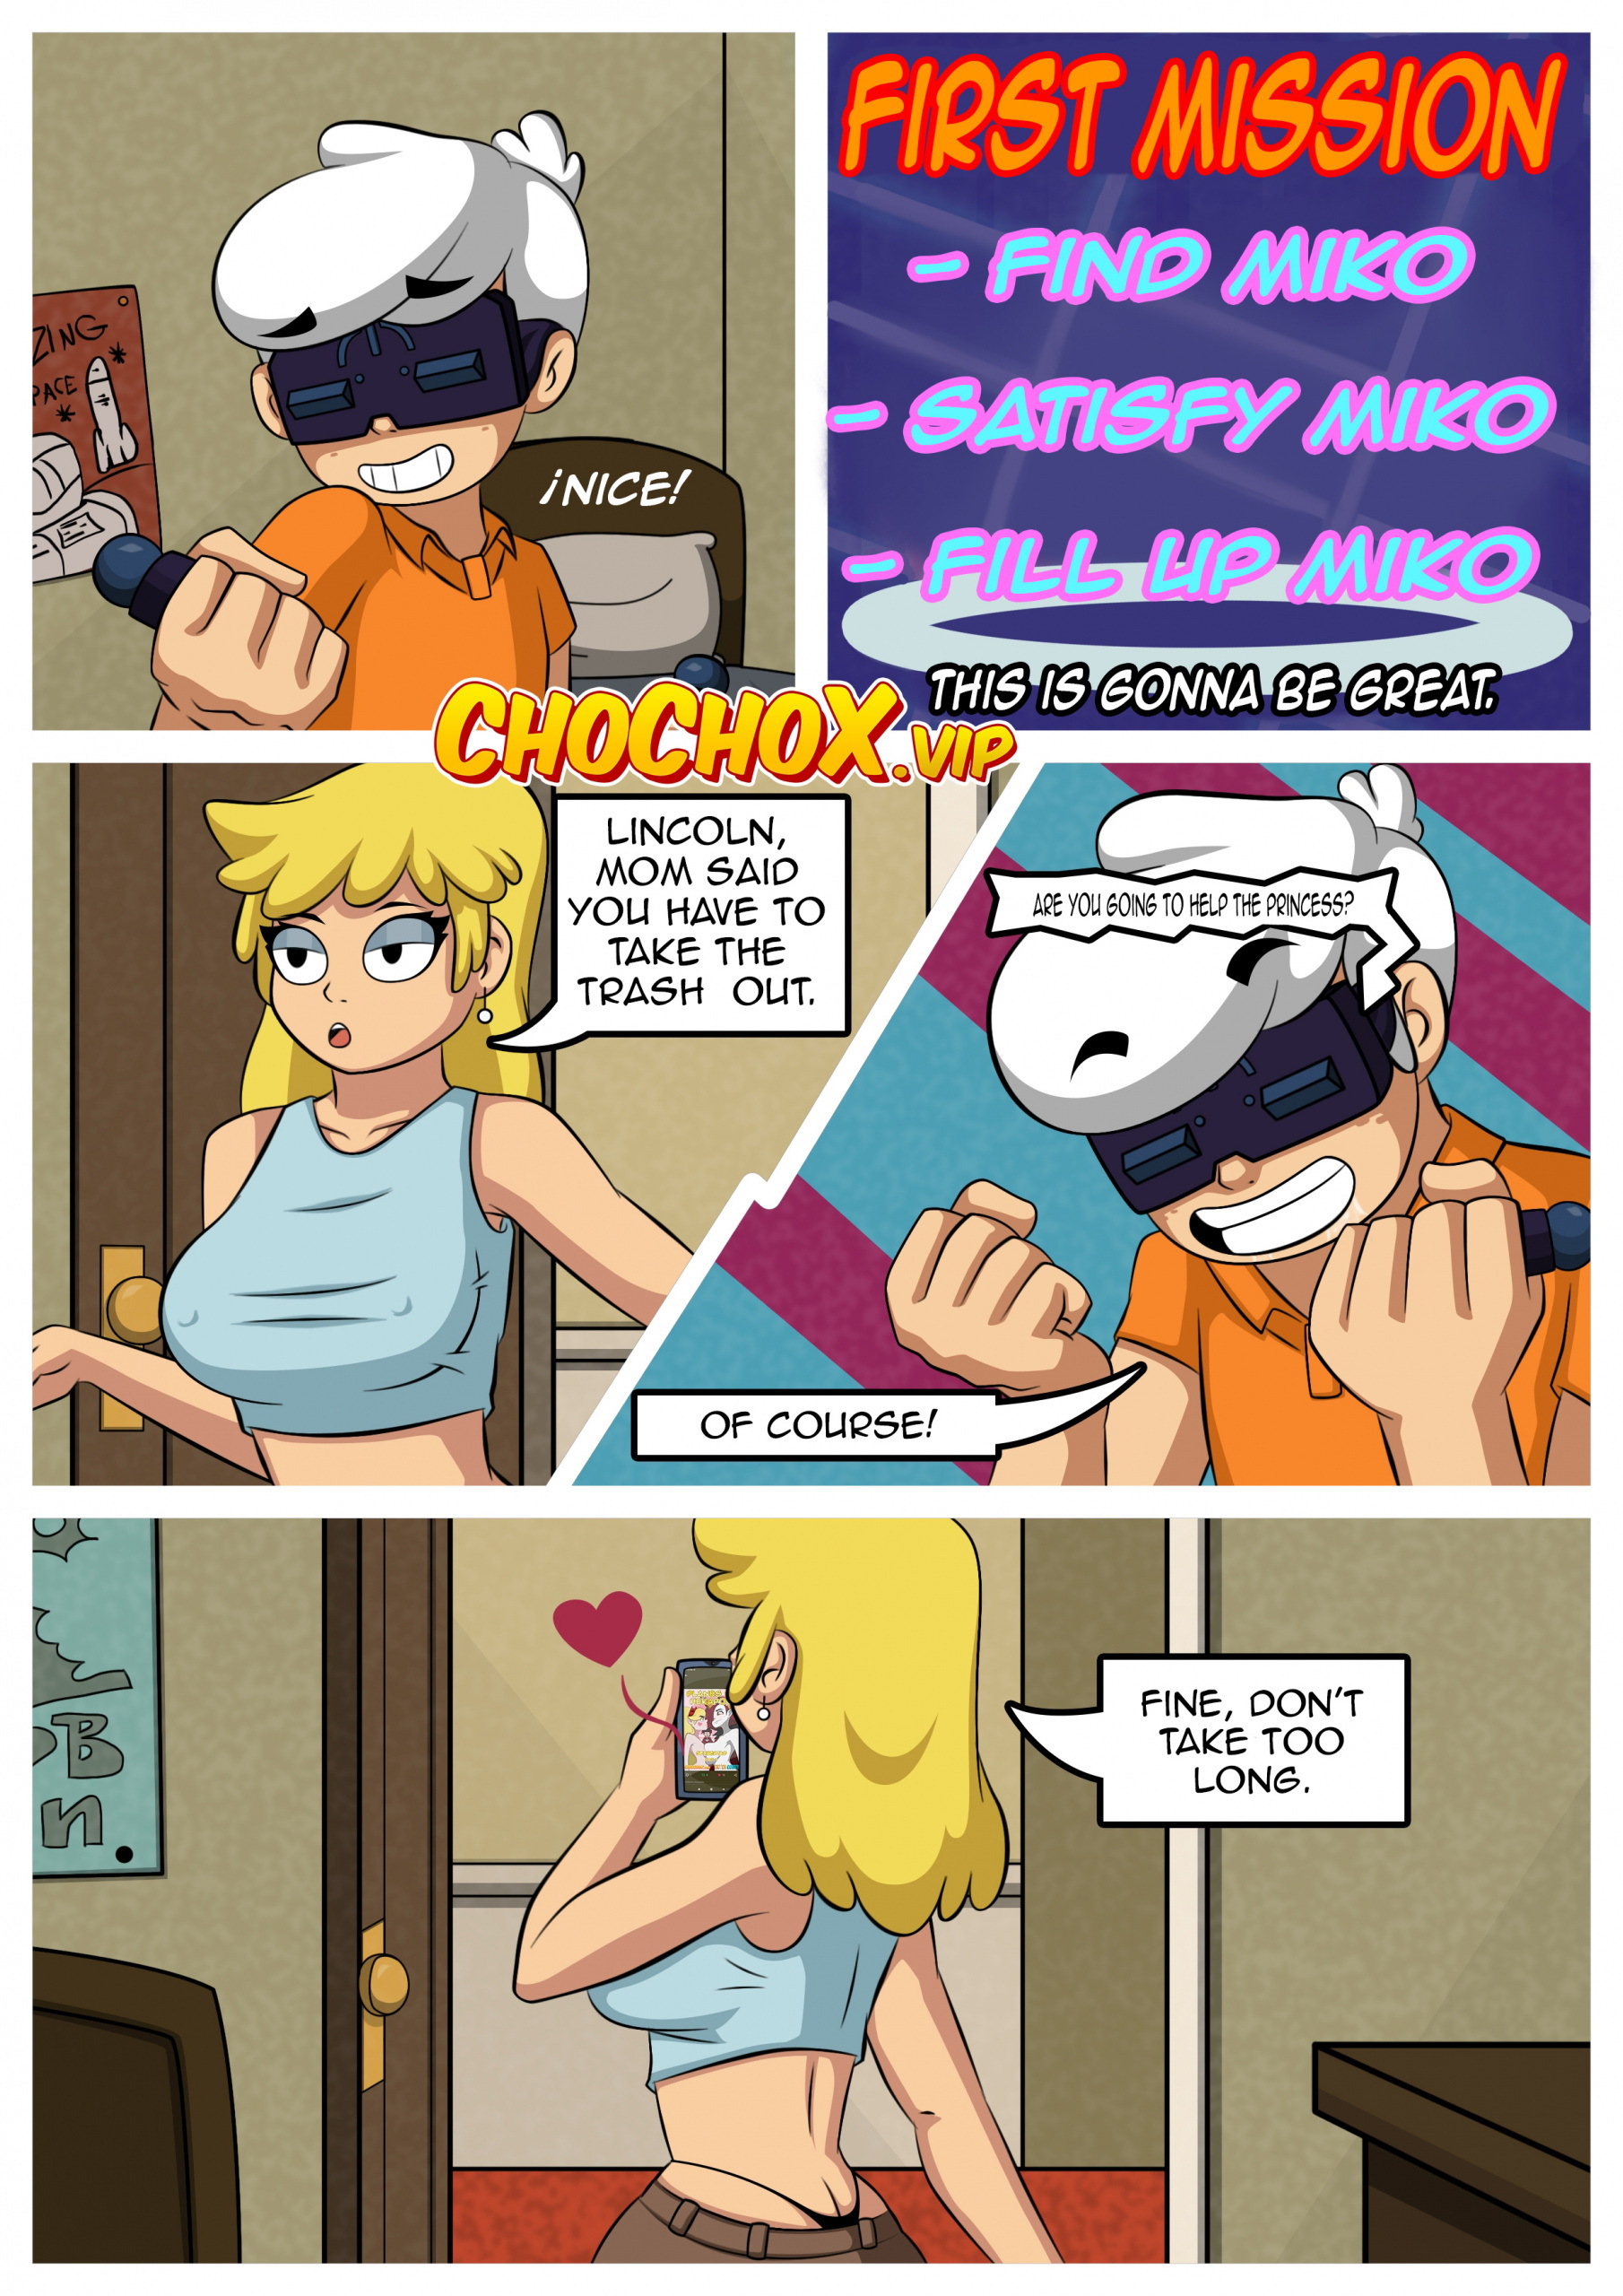 The Sex House - Page 8